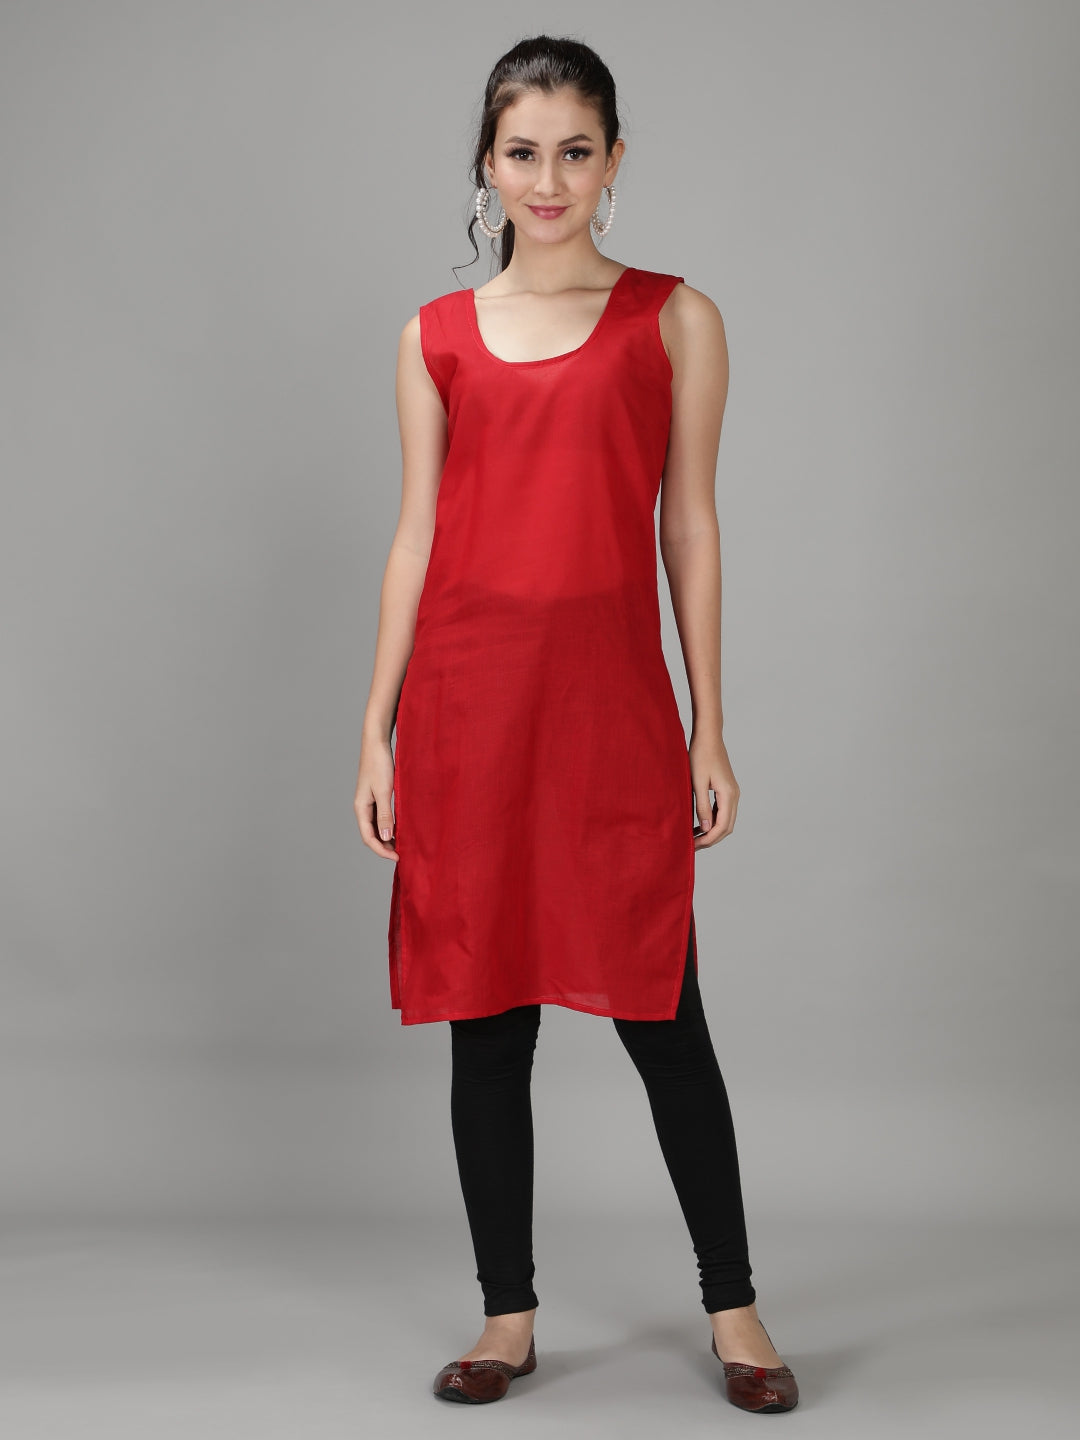 Embroidered-Red-Lucknowi-Chikan-Kurti